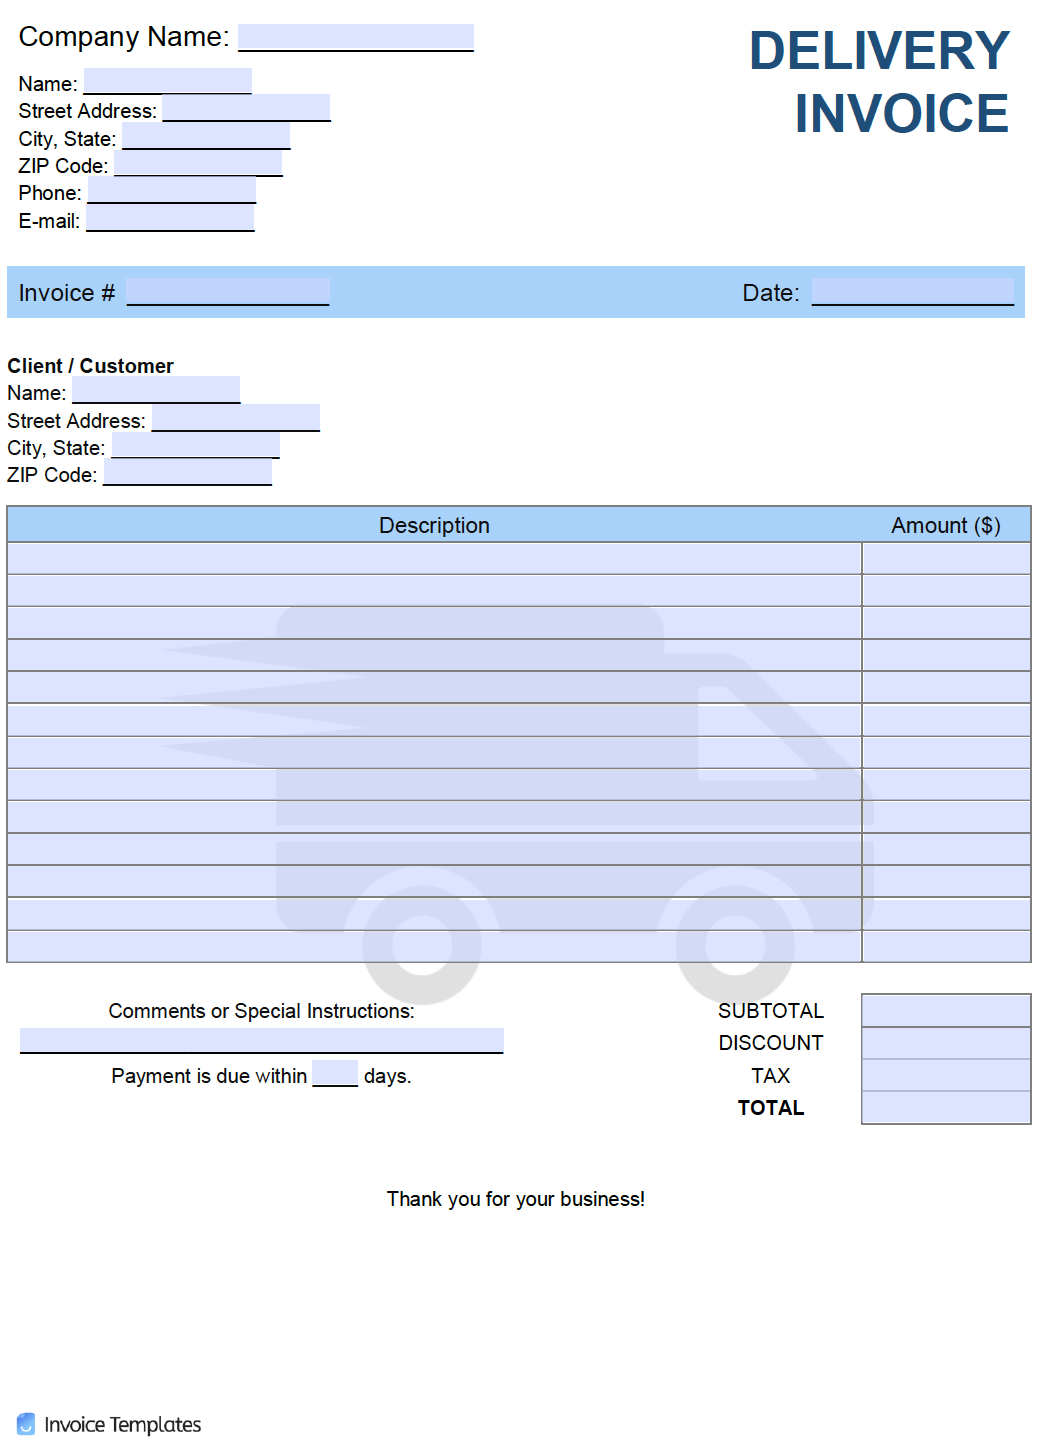 Free Delivery Invoice Template  PDF  WORD  EXCEL Throughout Trucking Company Invoice Template